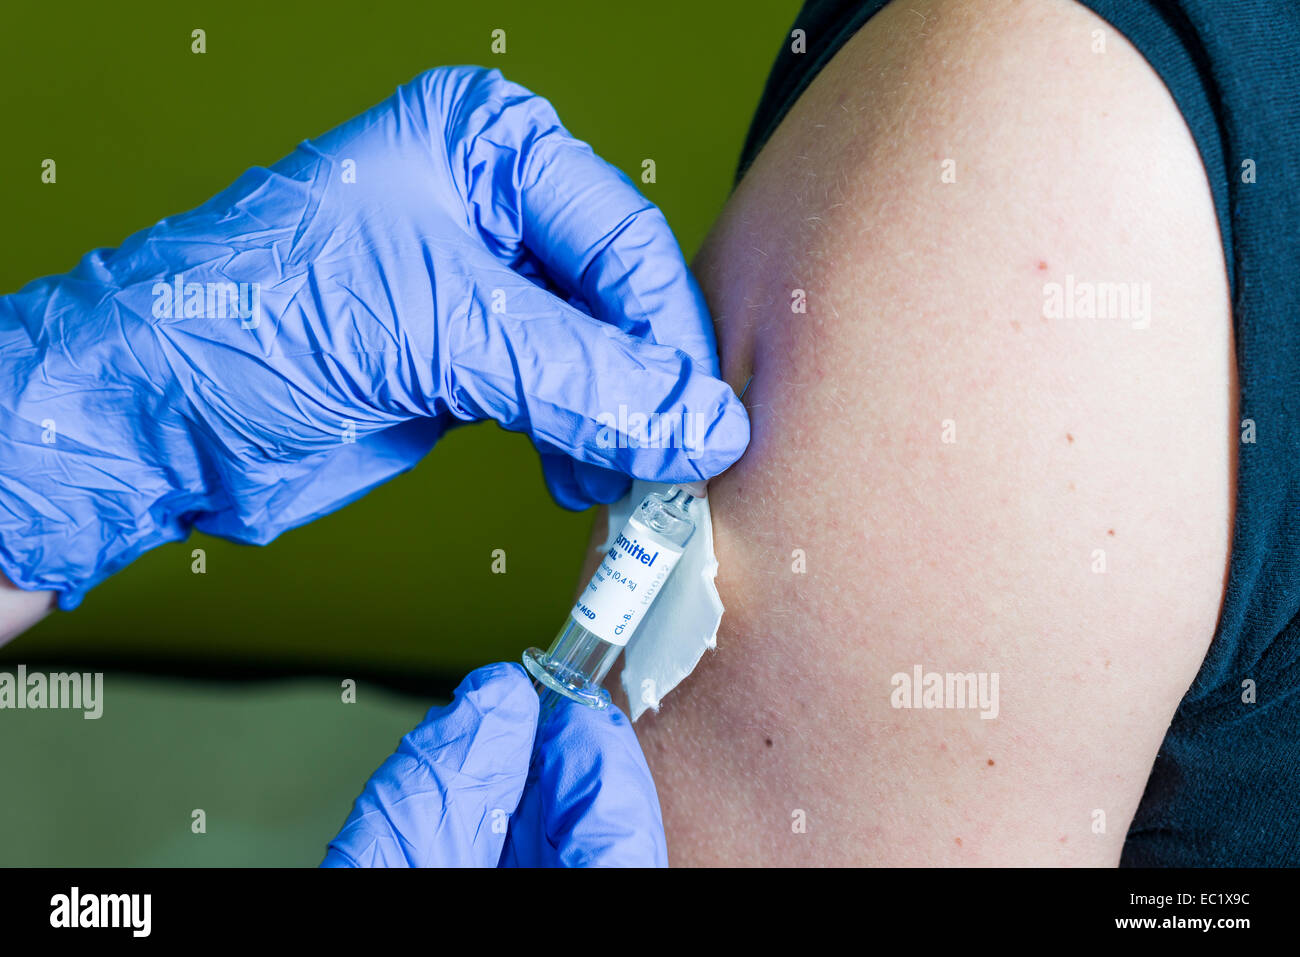 Injection of medicine into an arm, Berlin, Germany Stock Photo